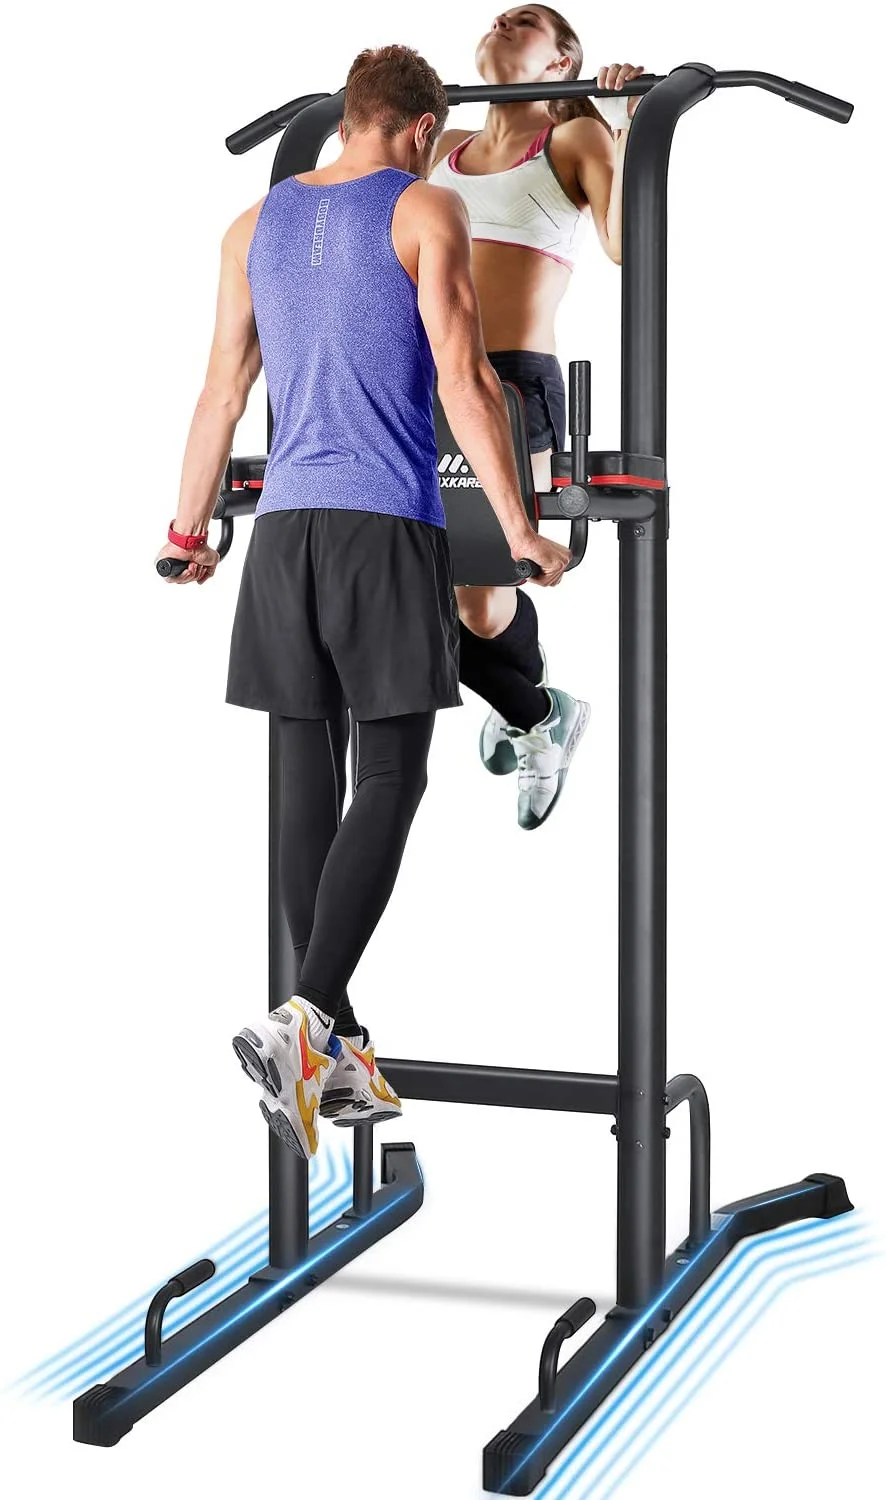 MaxKare Power Tower Equipment for Professional Home Gym – MAXKARE